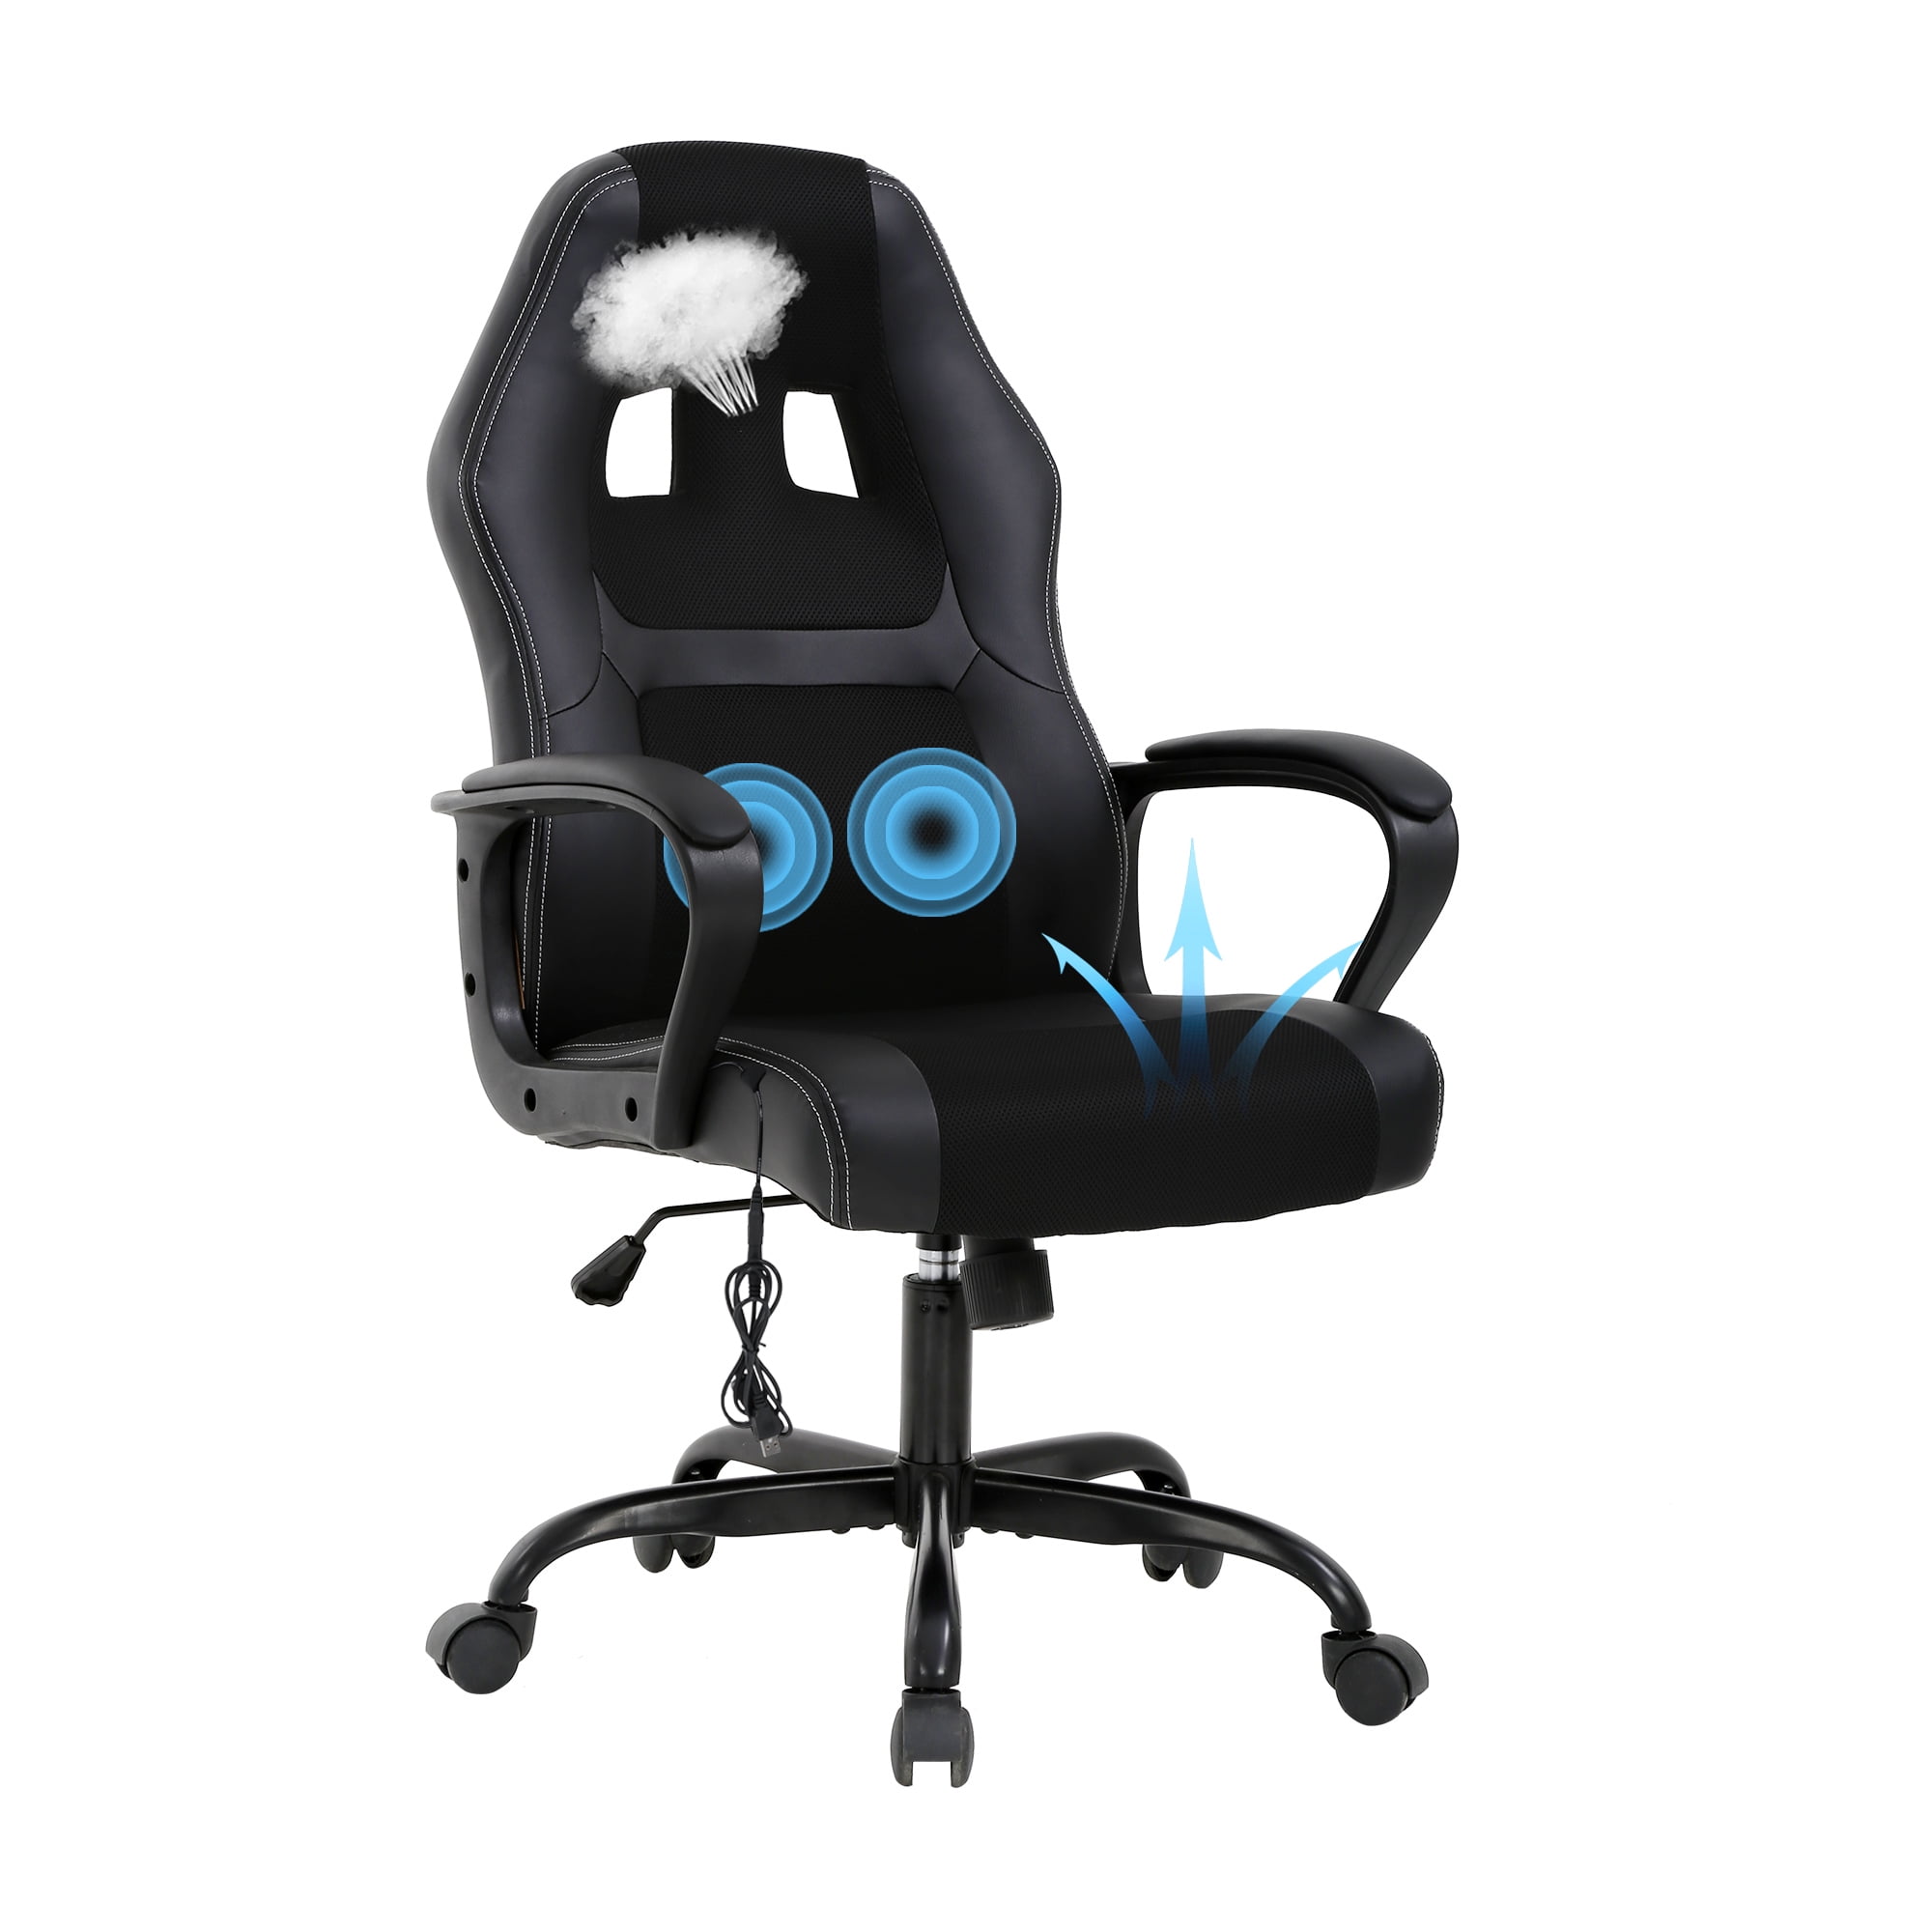 Happy Ending Massage Porn Bathurst - YRLLENSDAN Massage Gaming Chair Video Game for Adults, PU Leather Computer  Chair with Arms & Massaging Back Ergonomic High-Back Video Game Chair for  Men Women, Black - Walmart.com